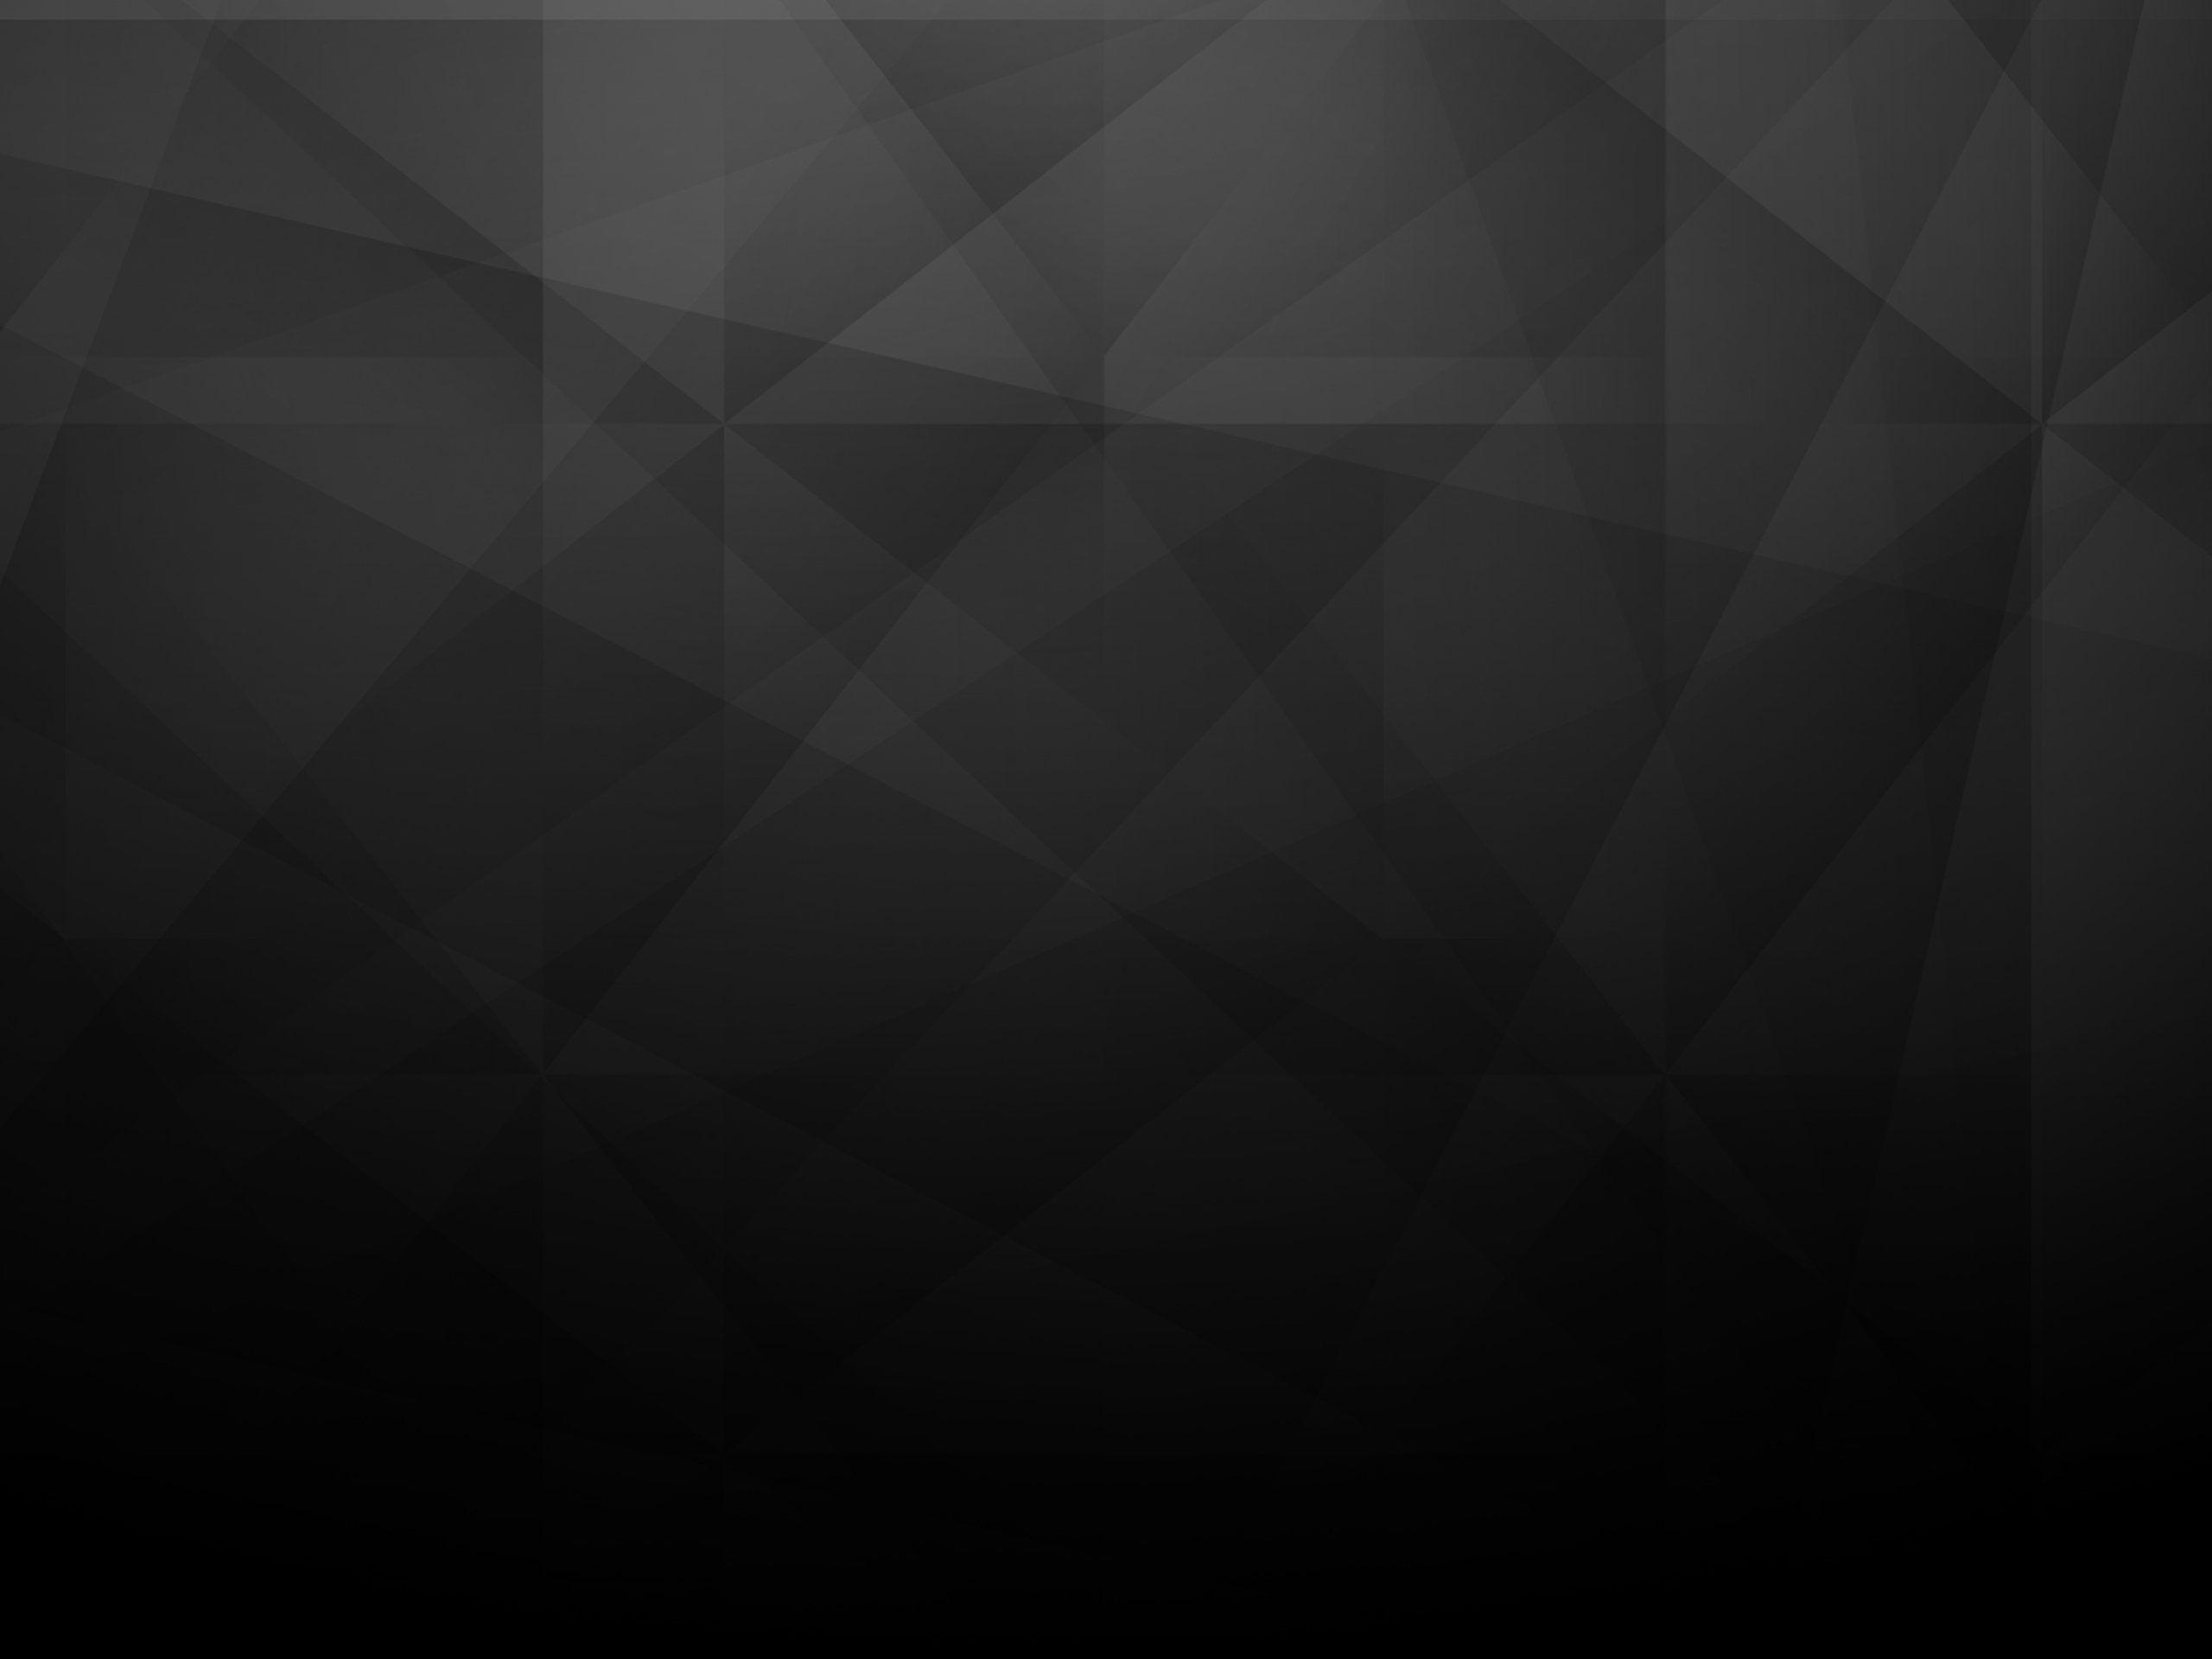 Black Wallpaper In FHD For Free Download For Android, Desktop